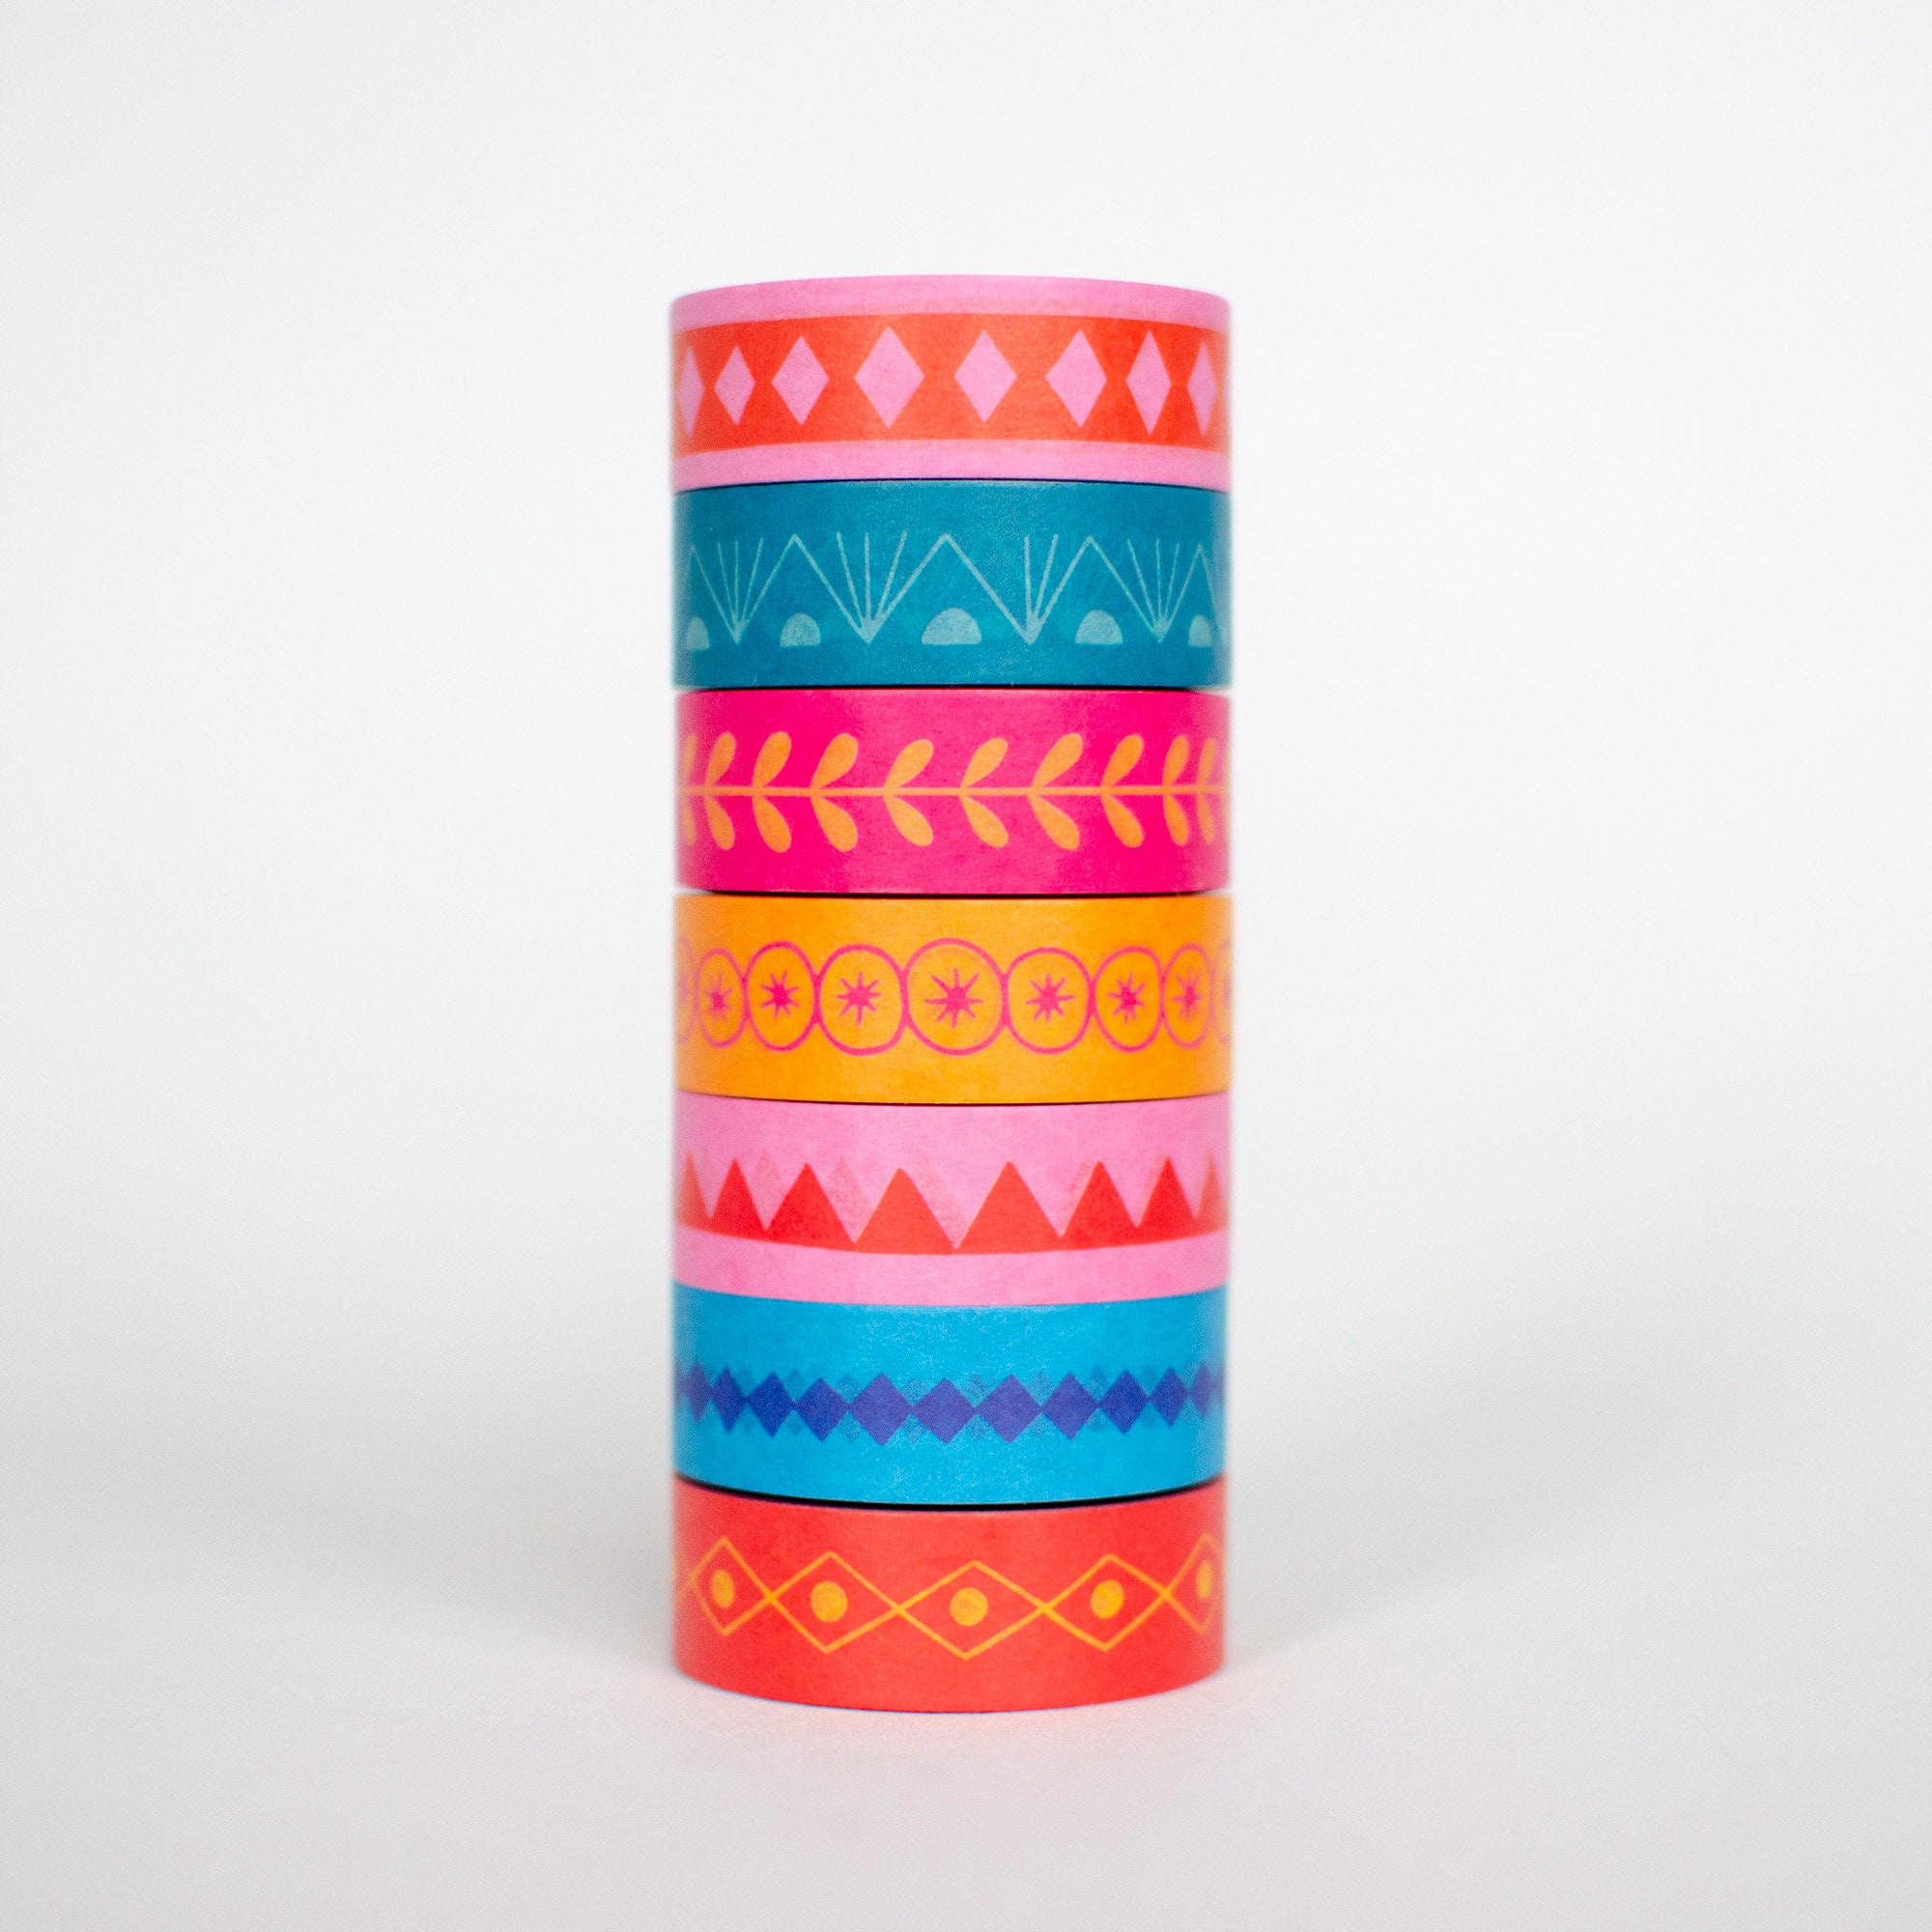 New! Hot Pink Wild Side Tiger Illustrated Washi Tape by Rebecca